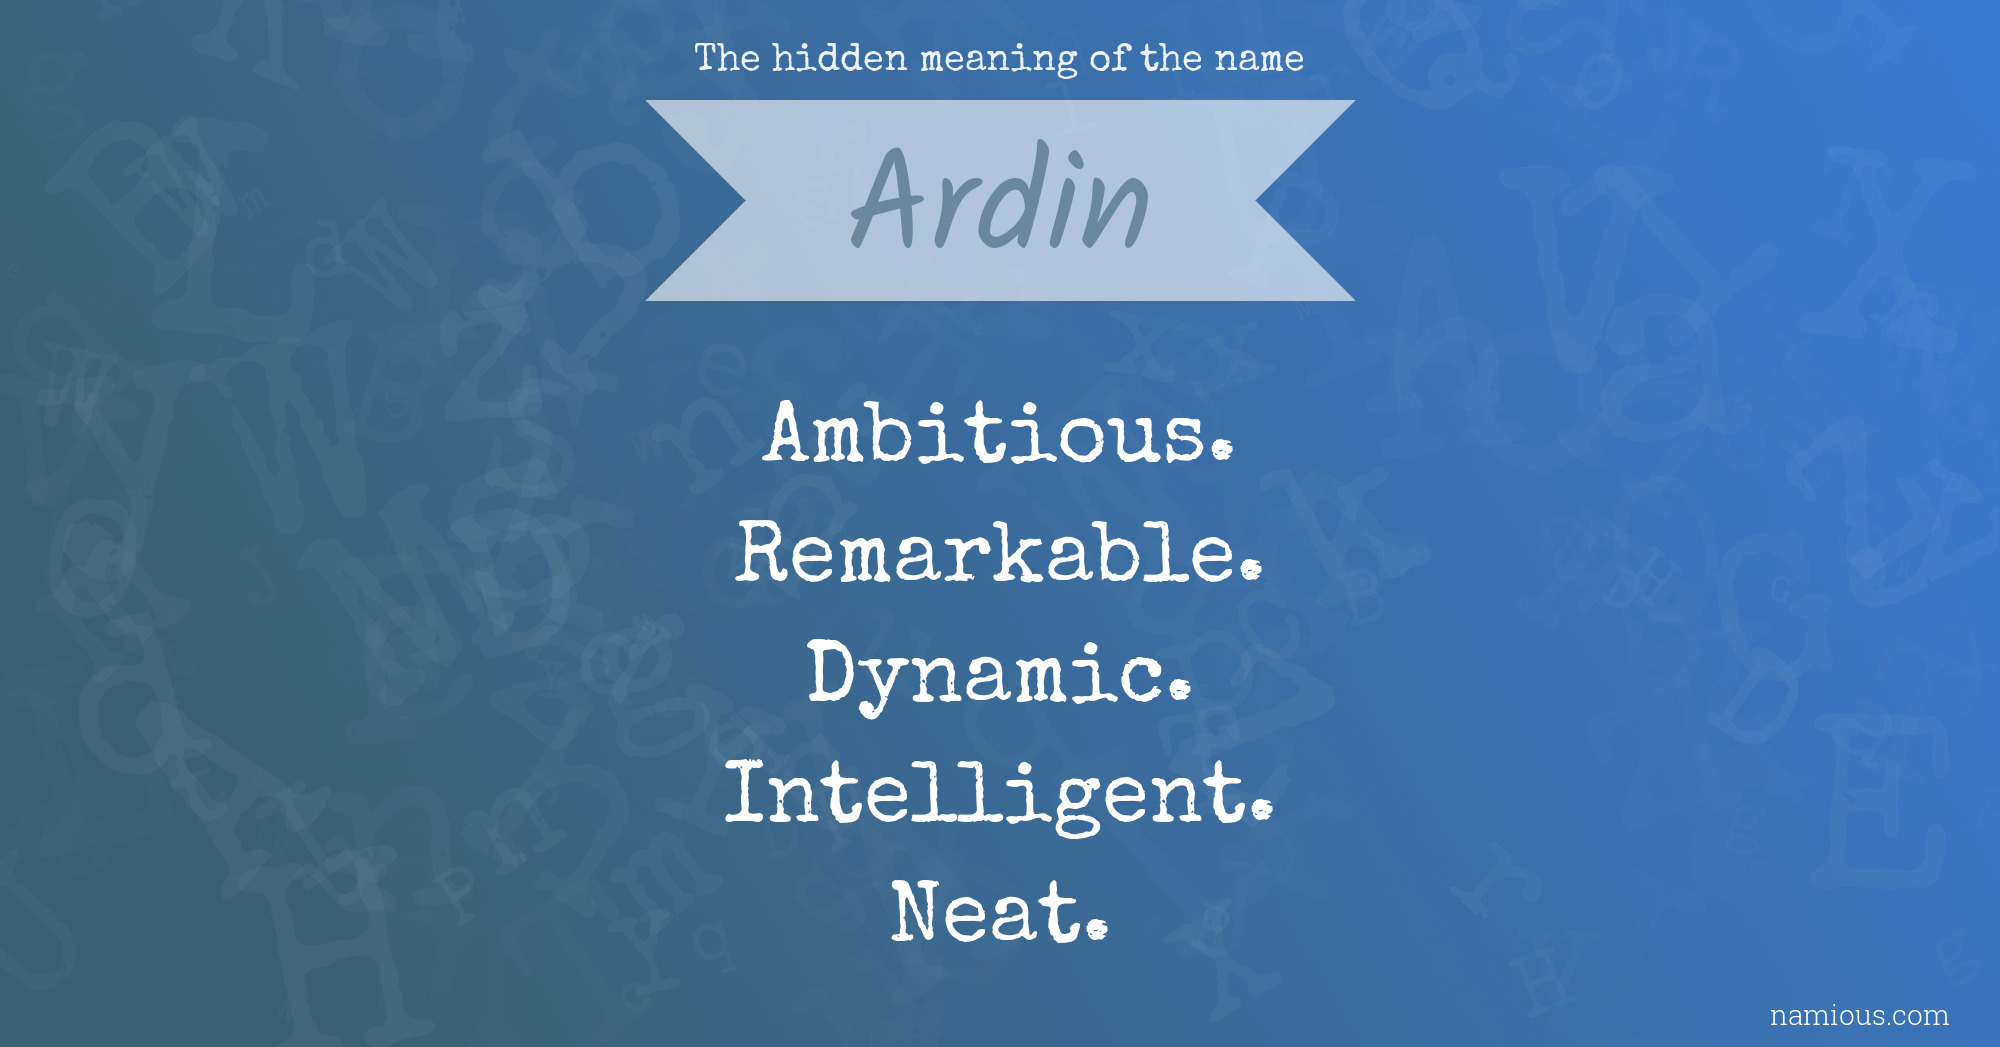 The hidden meaning of the name Ardin